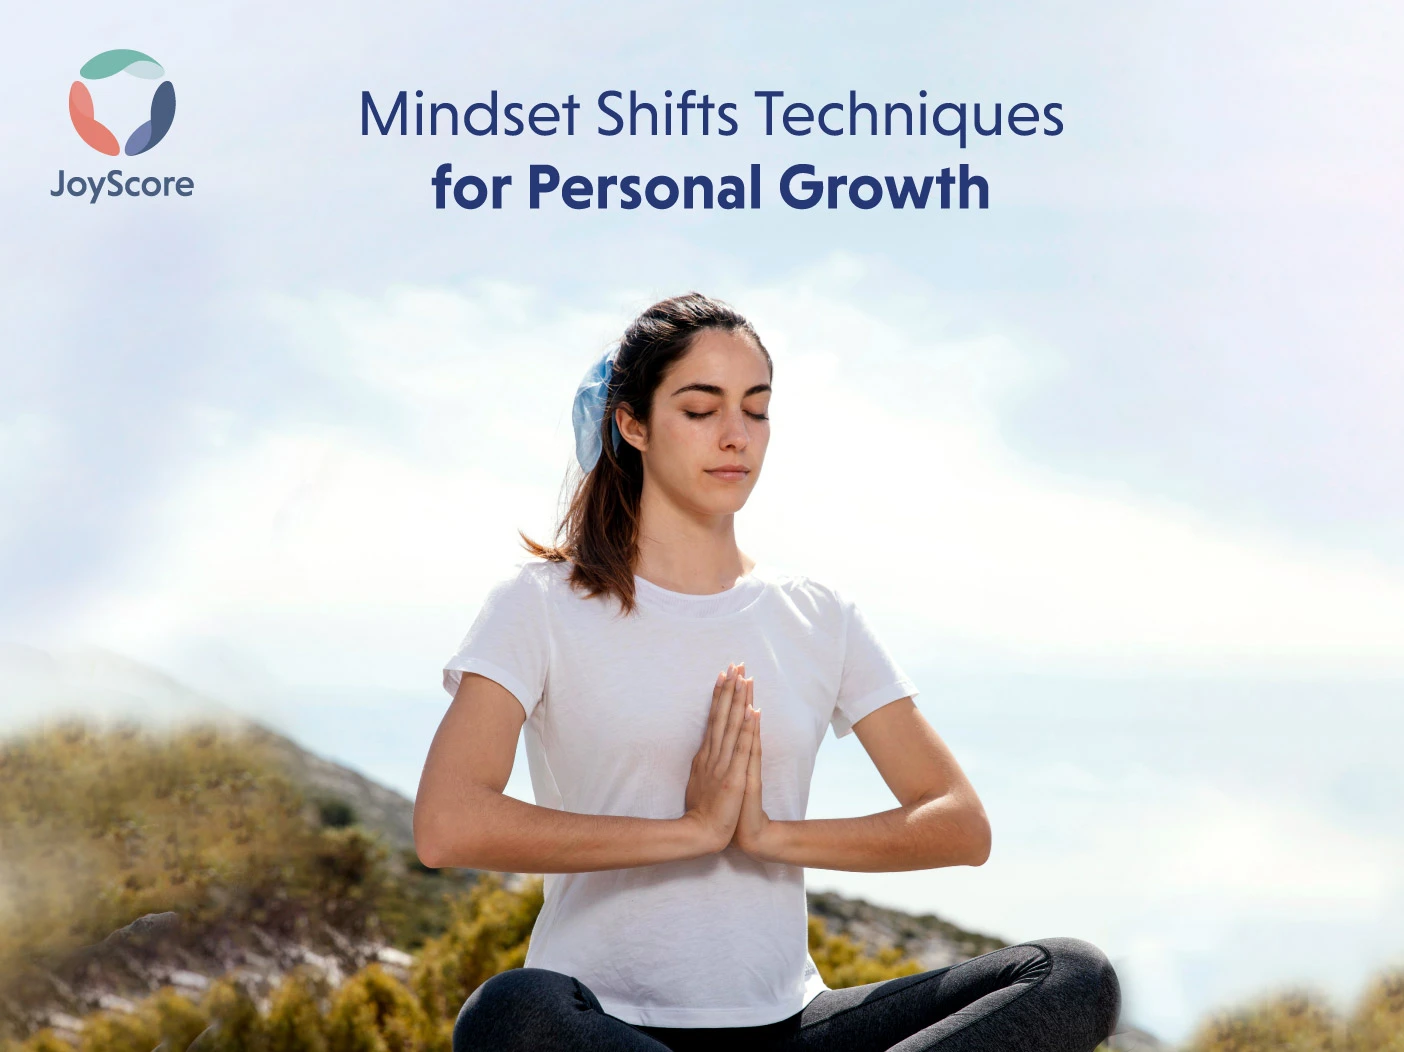 Mindset Shifts Techniques for Personal Growth